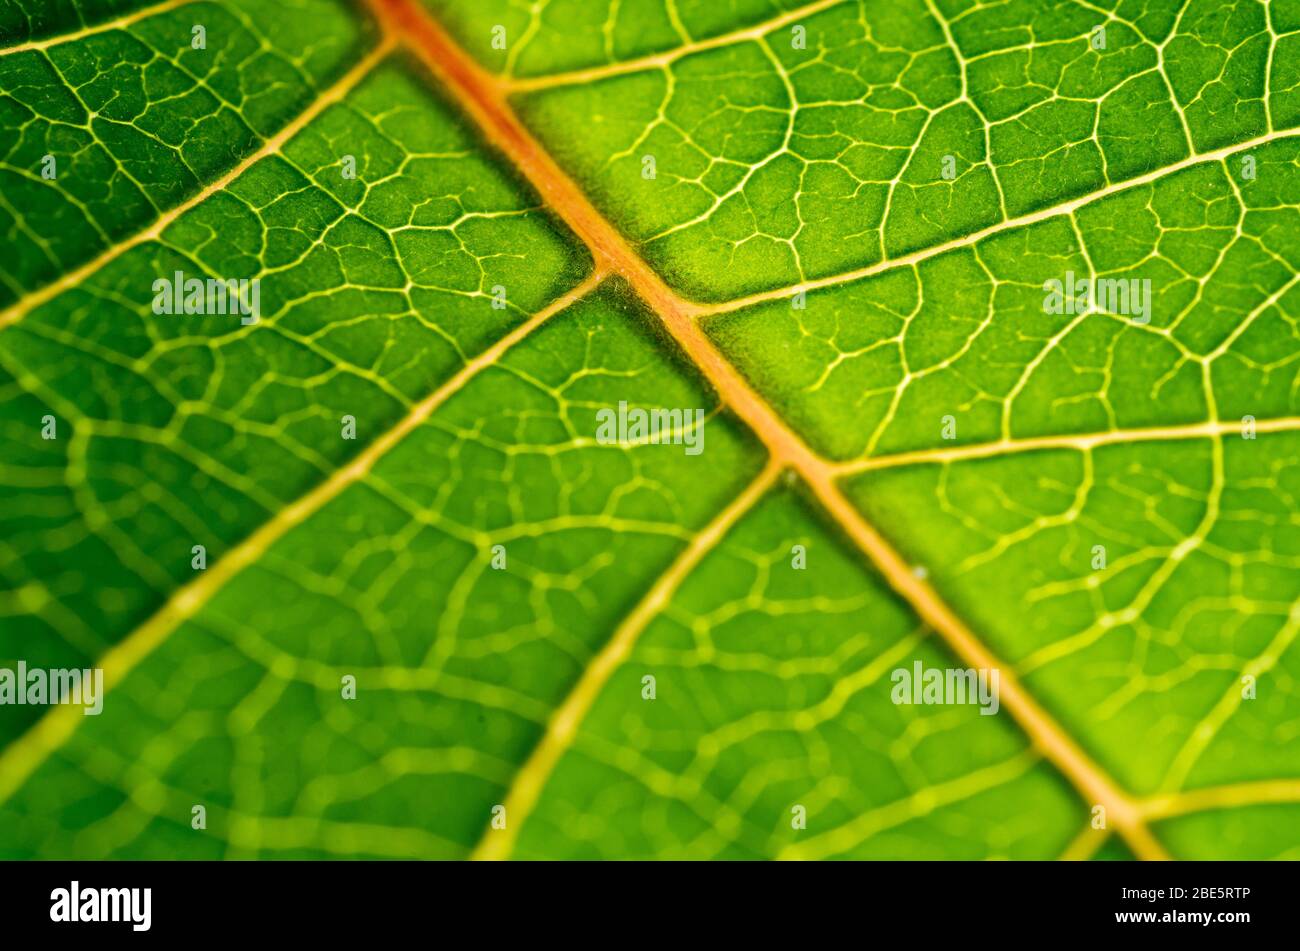 Macro photo of a leaf construction and structure showing Xylem and Phloem Veins Stock Photo